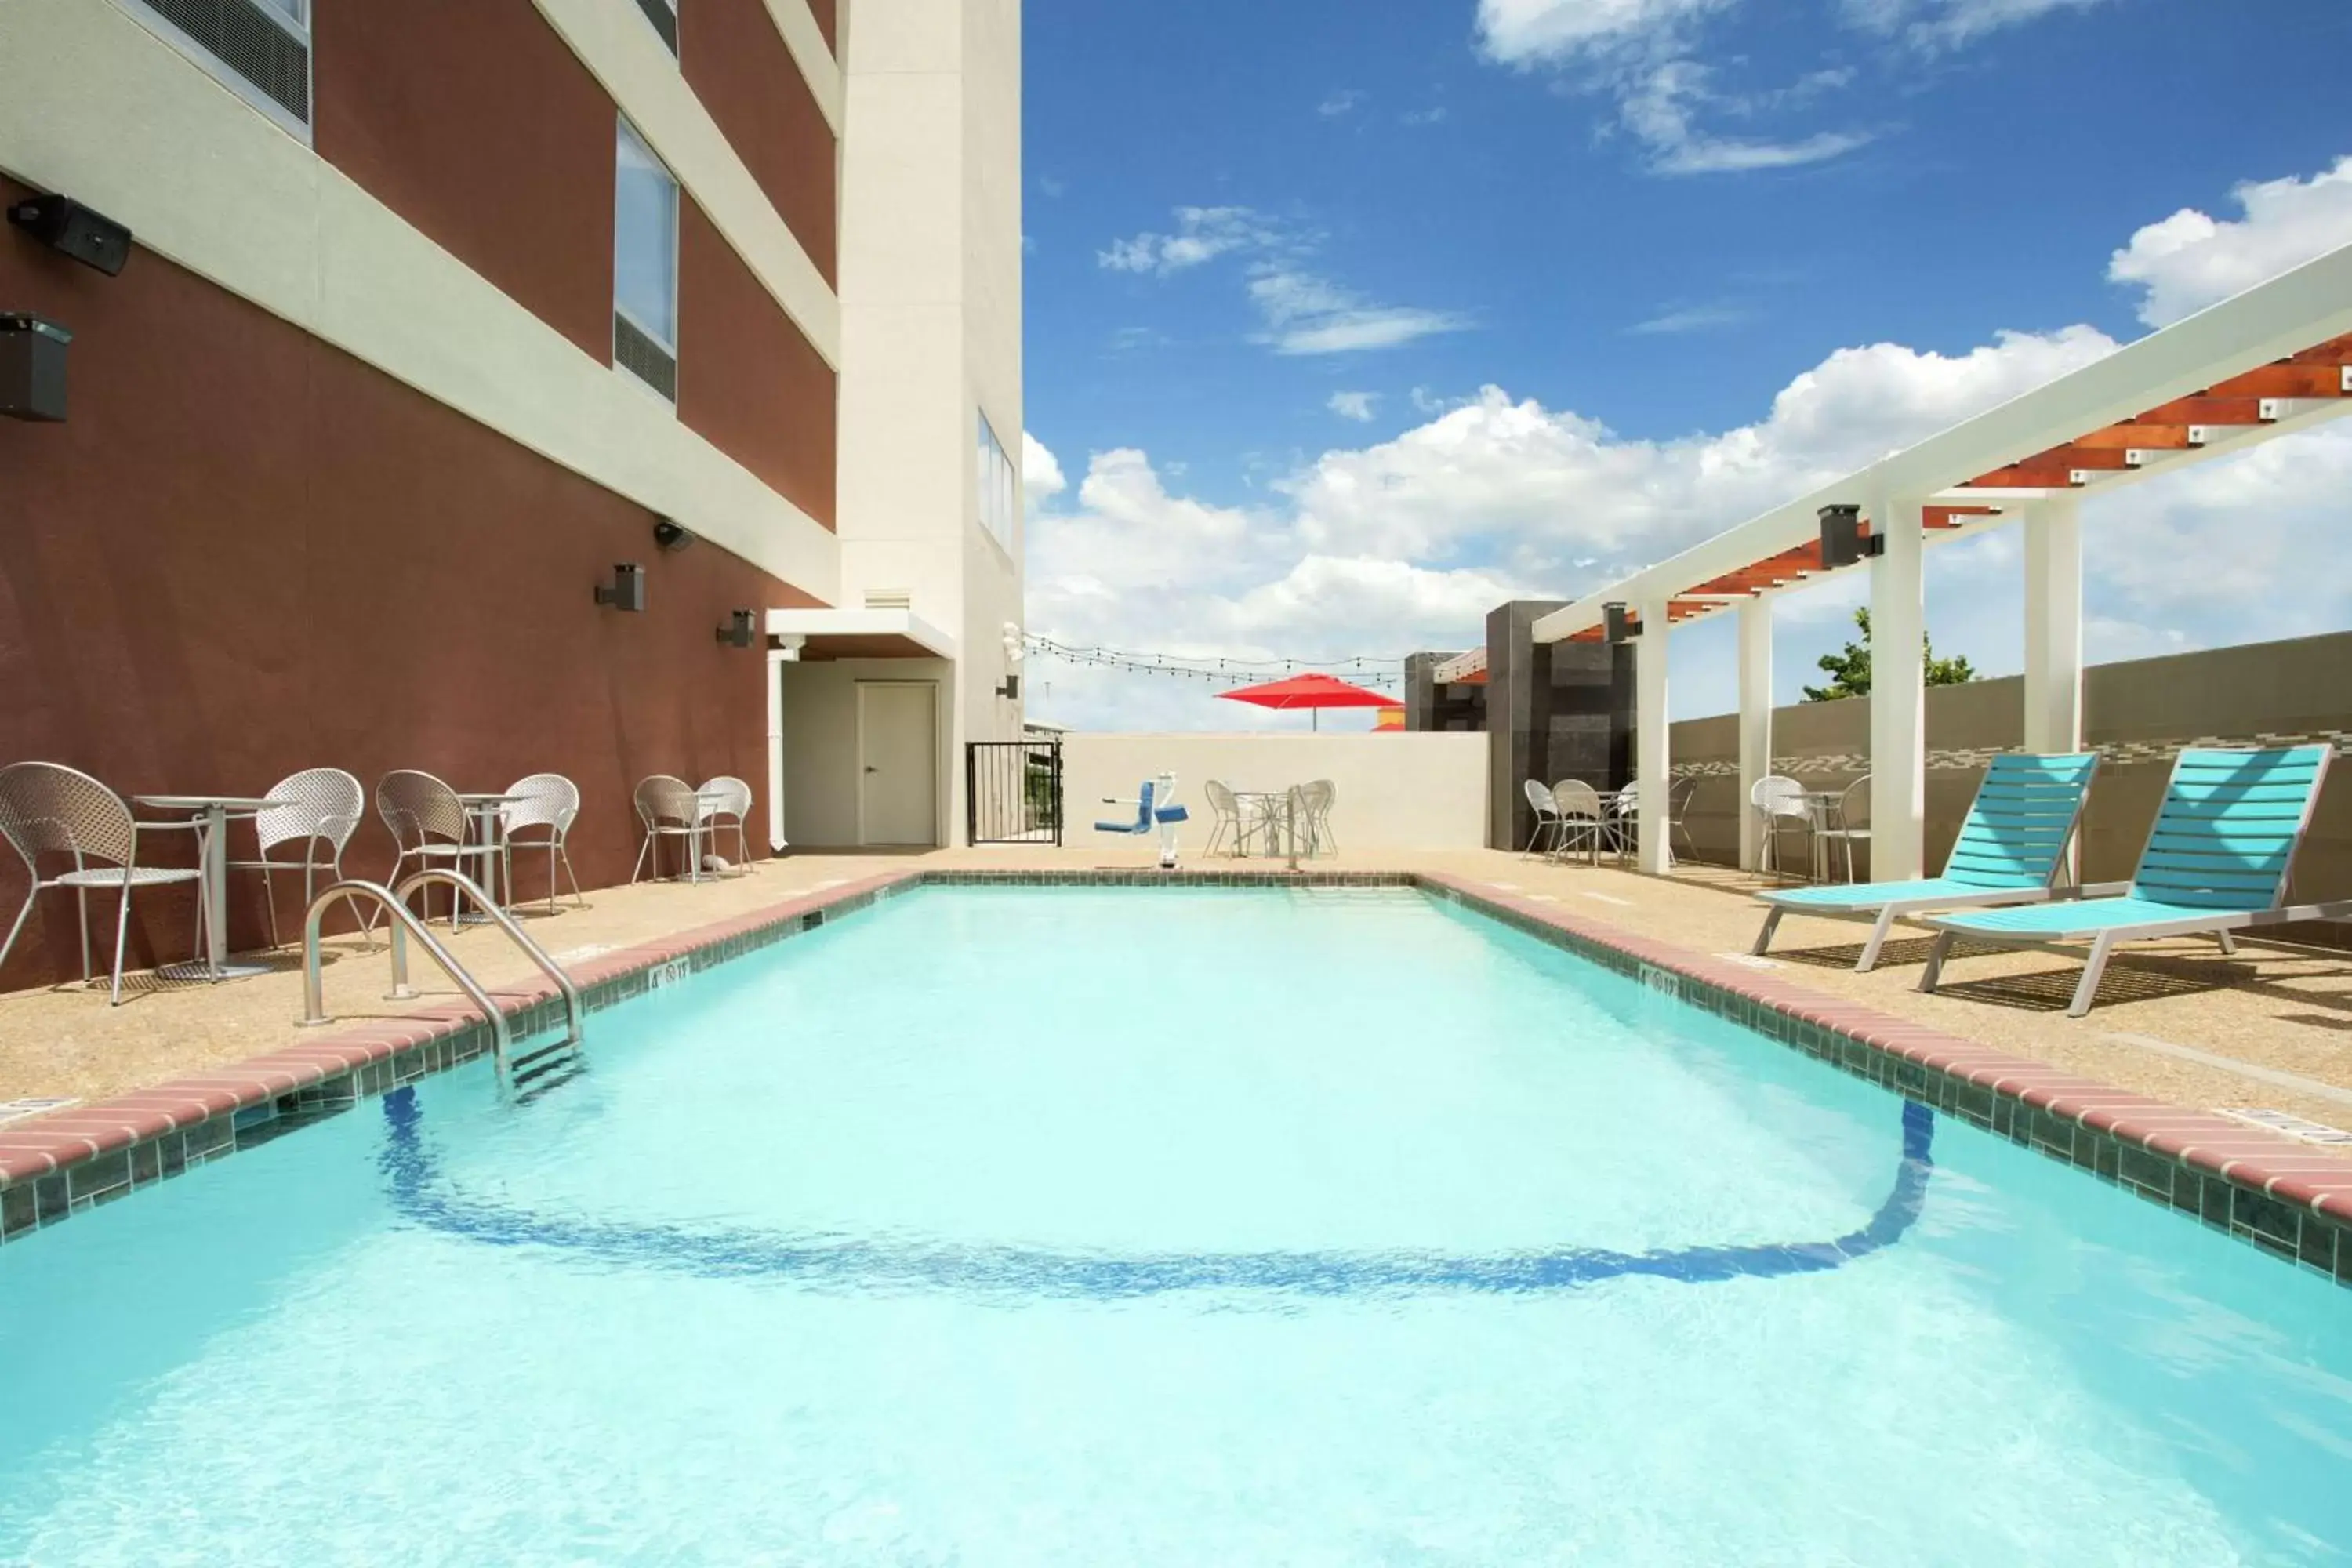 Property building, Swimming Pool in Home2 Suites by Hilton San Antonio Airport, TX